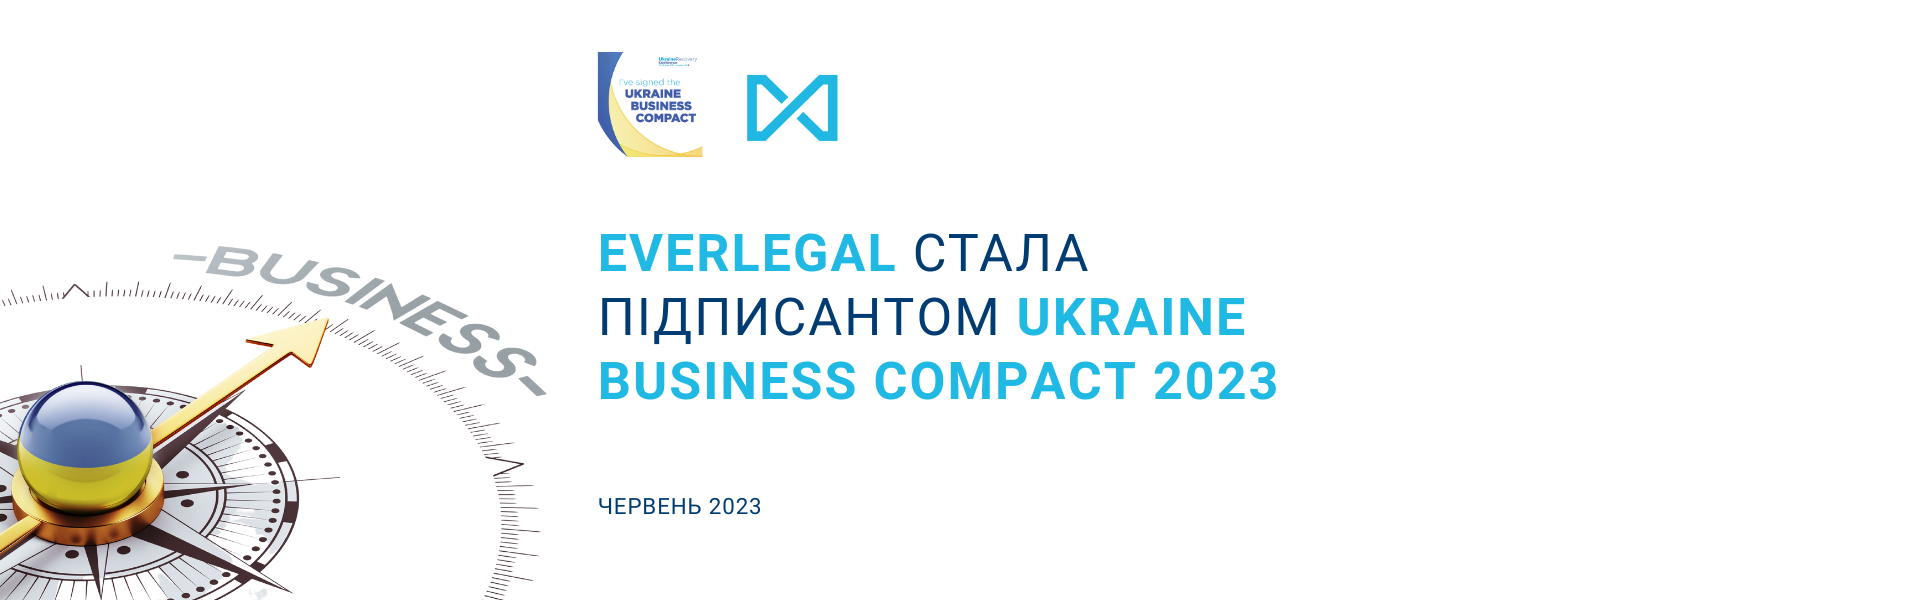 EVERLEGAL becomes a signatory to the Ukraine Business Compact 2023